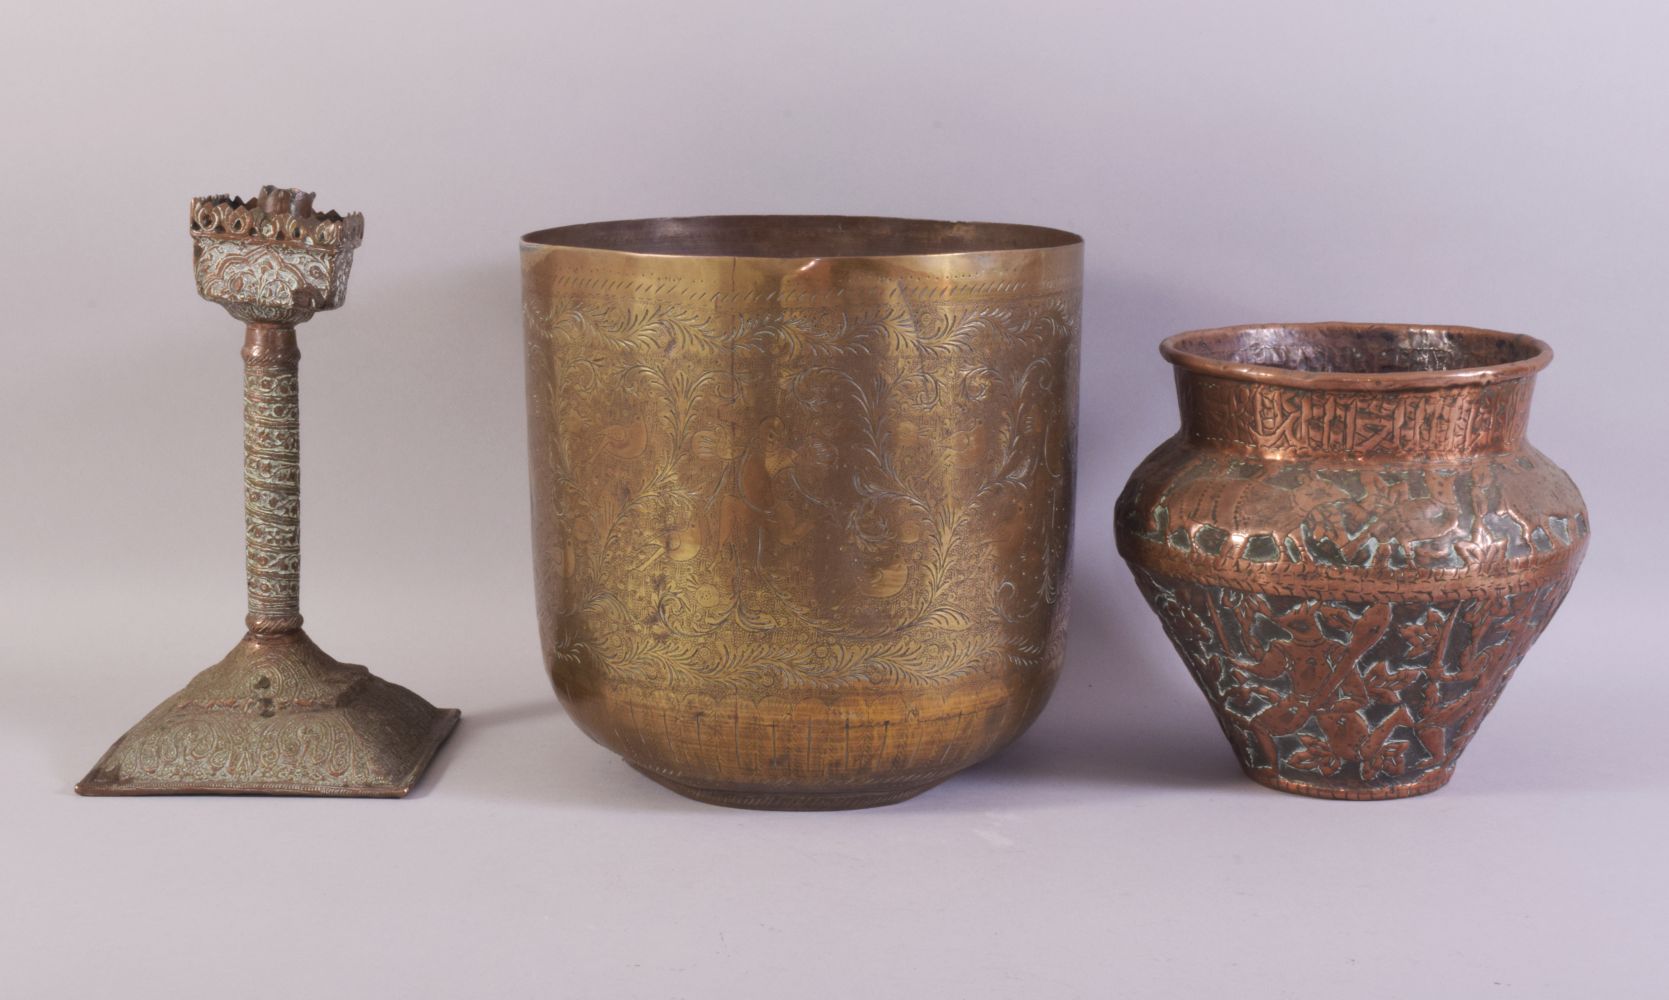 THREE ISLAMIC BRASS / METALWARE ITEMS, comprising a embossed and chased copper vase, an engraved